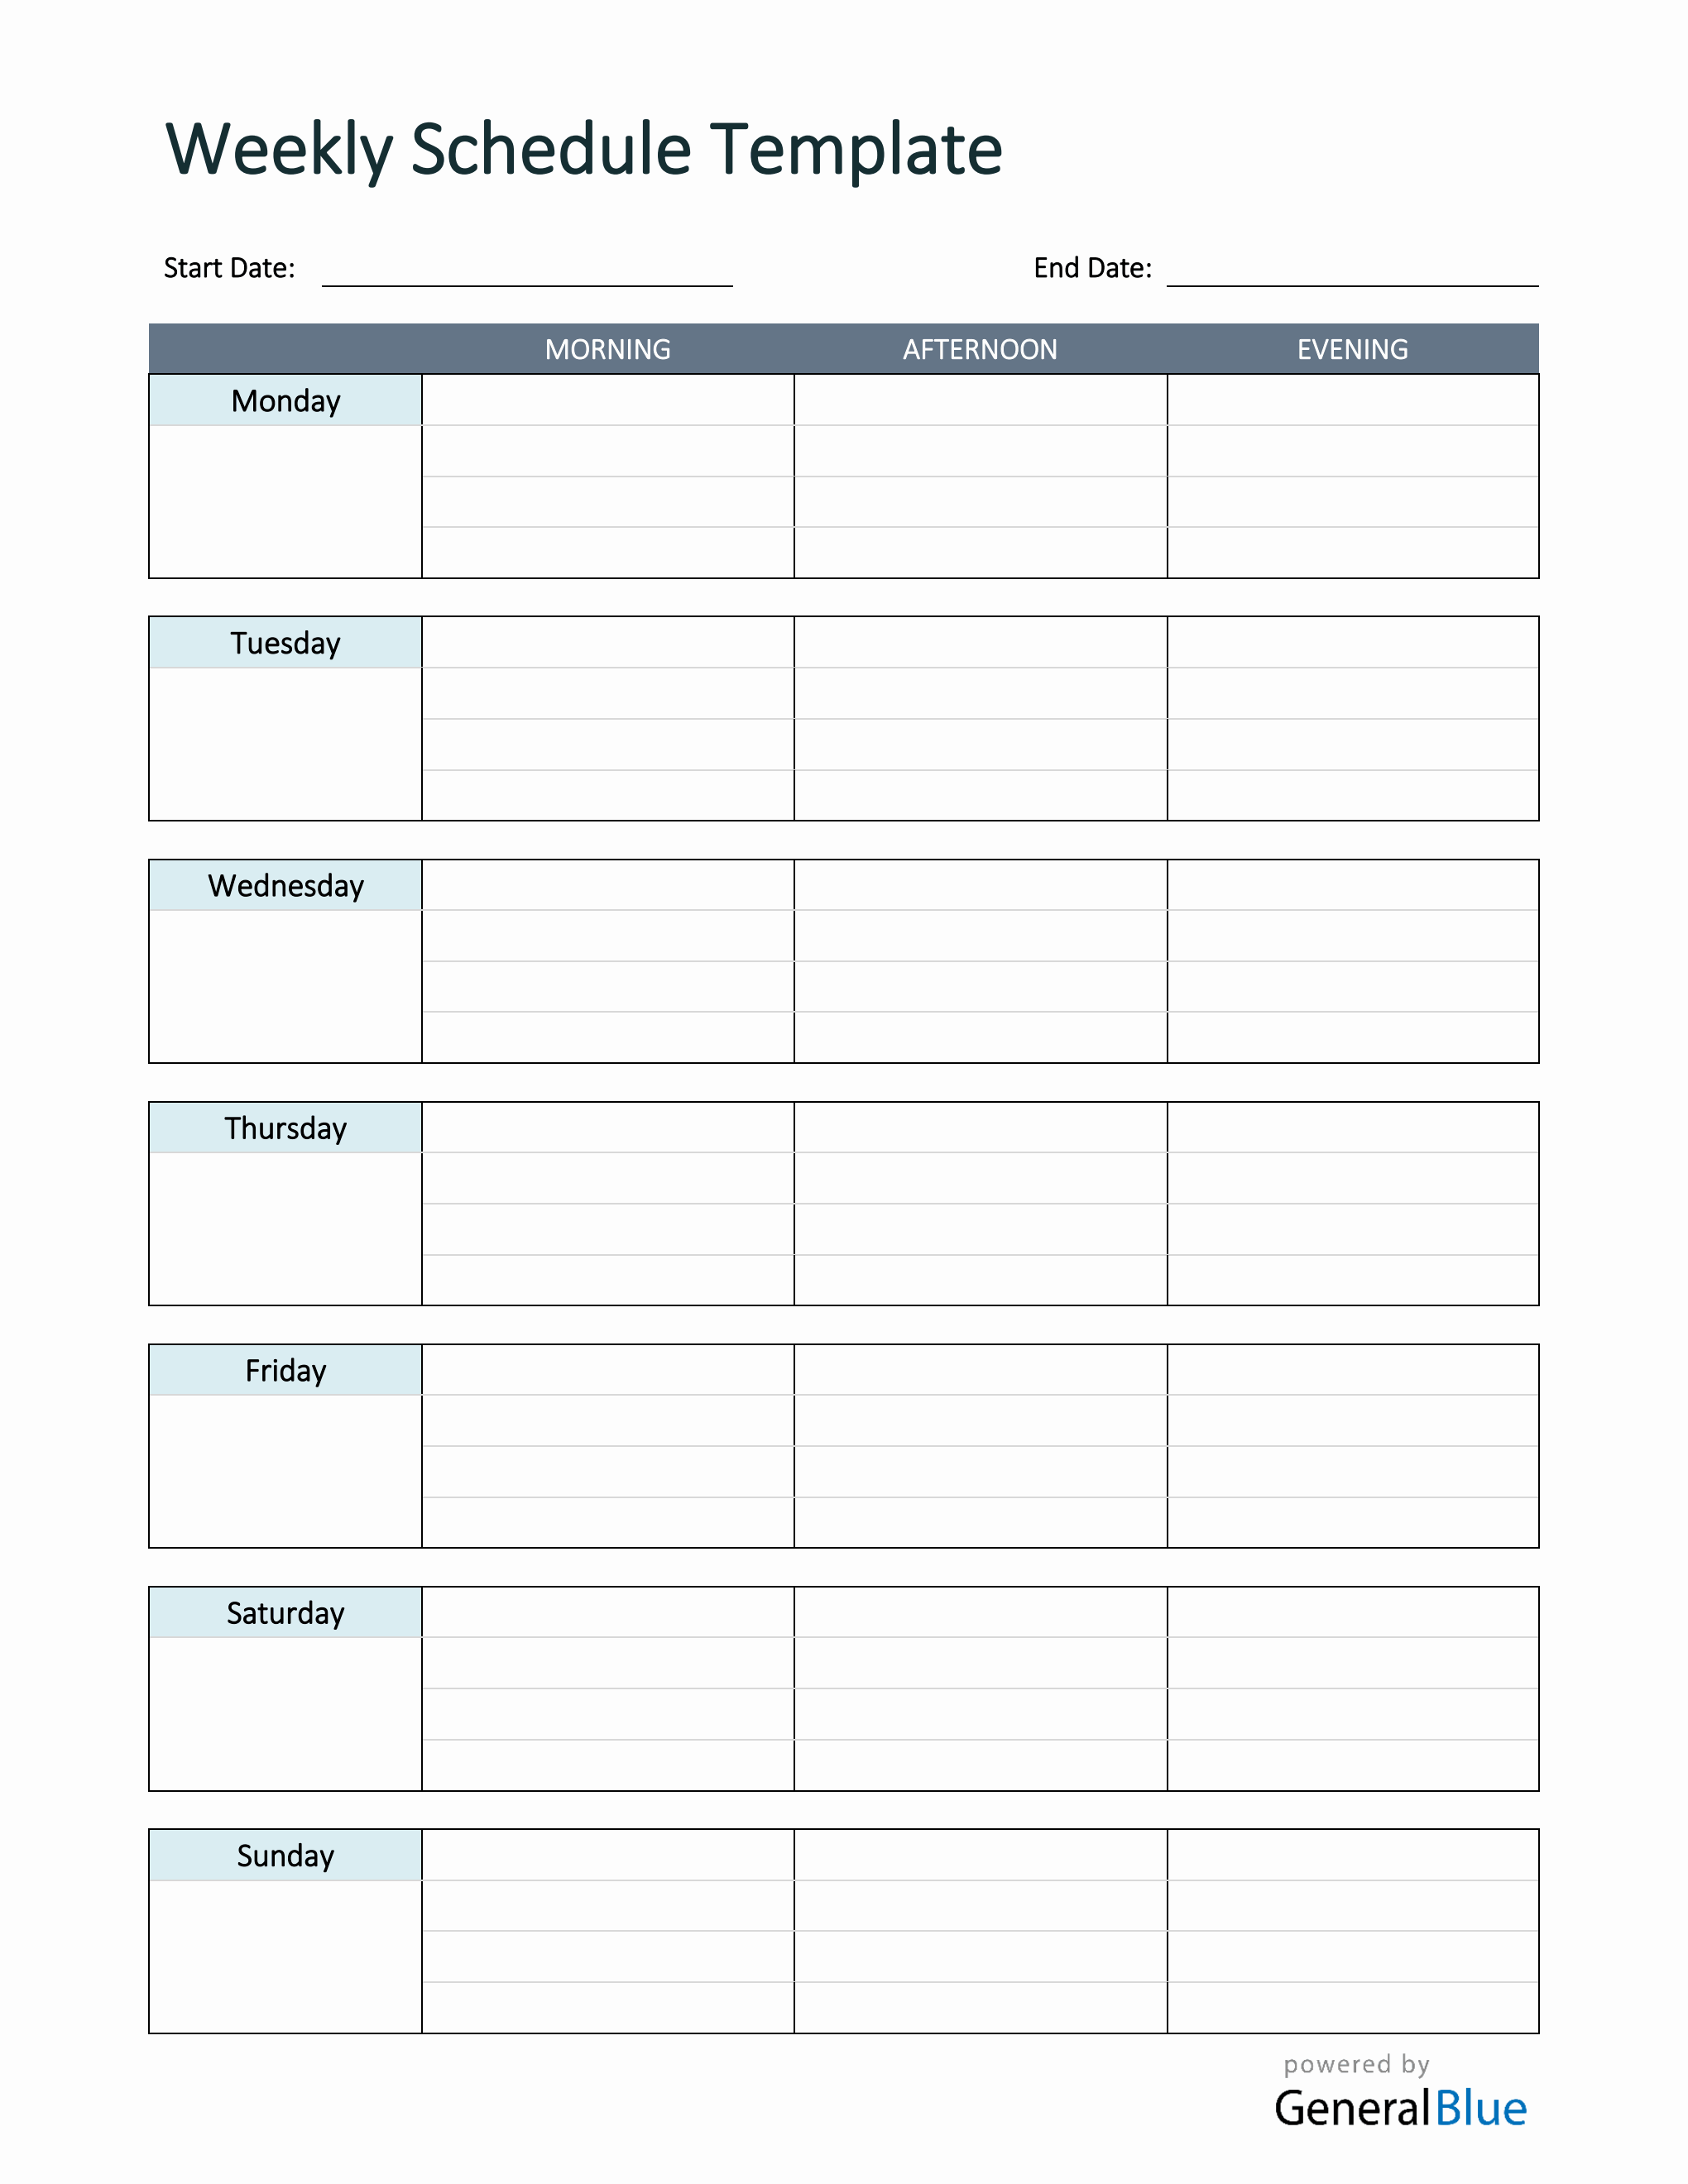 free-weekly-schedules-for-word-18-templates-weekly-planner-templates-maxwell-kline